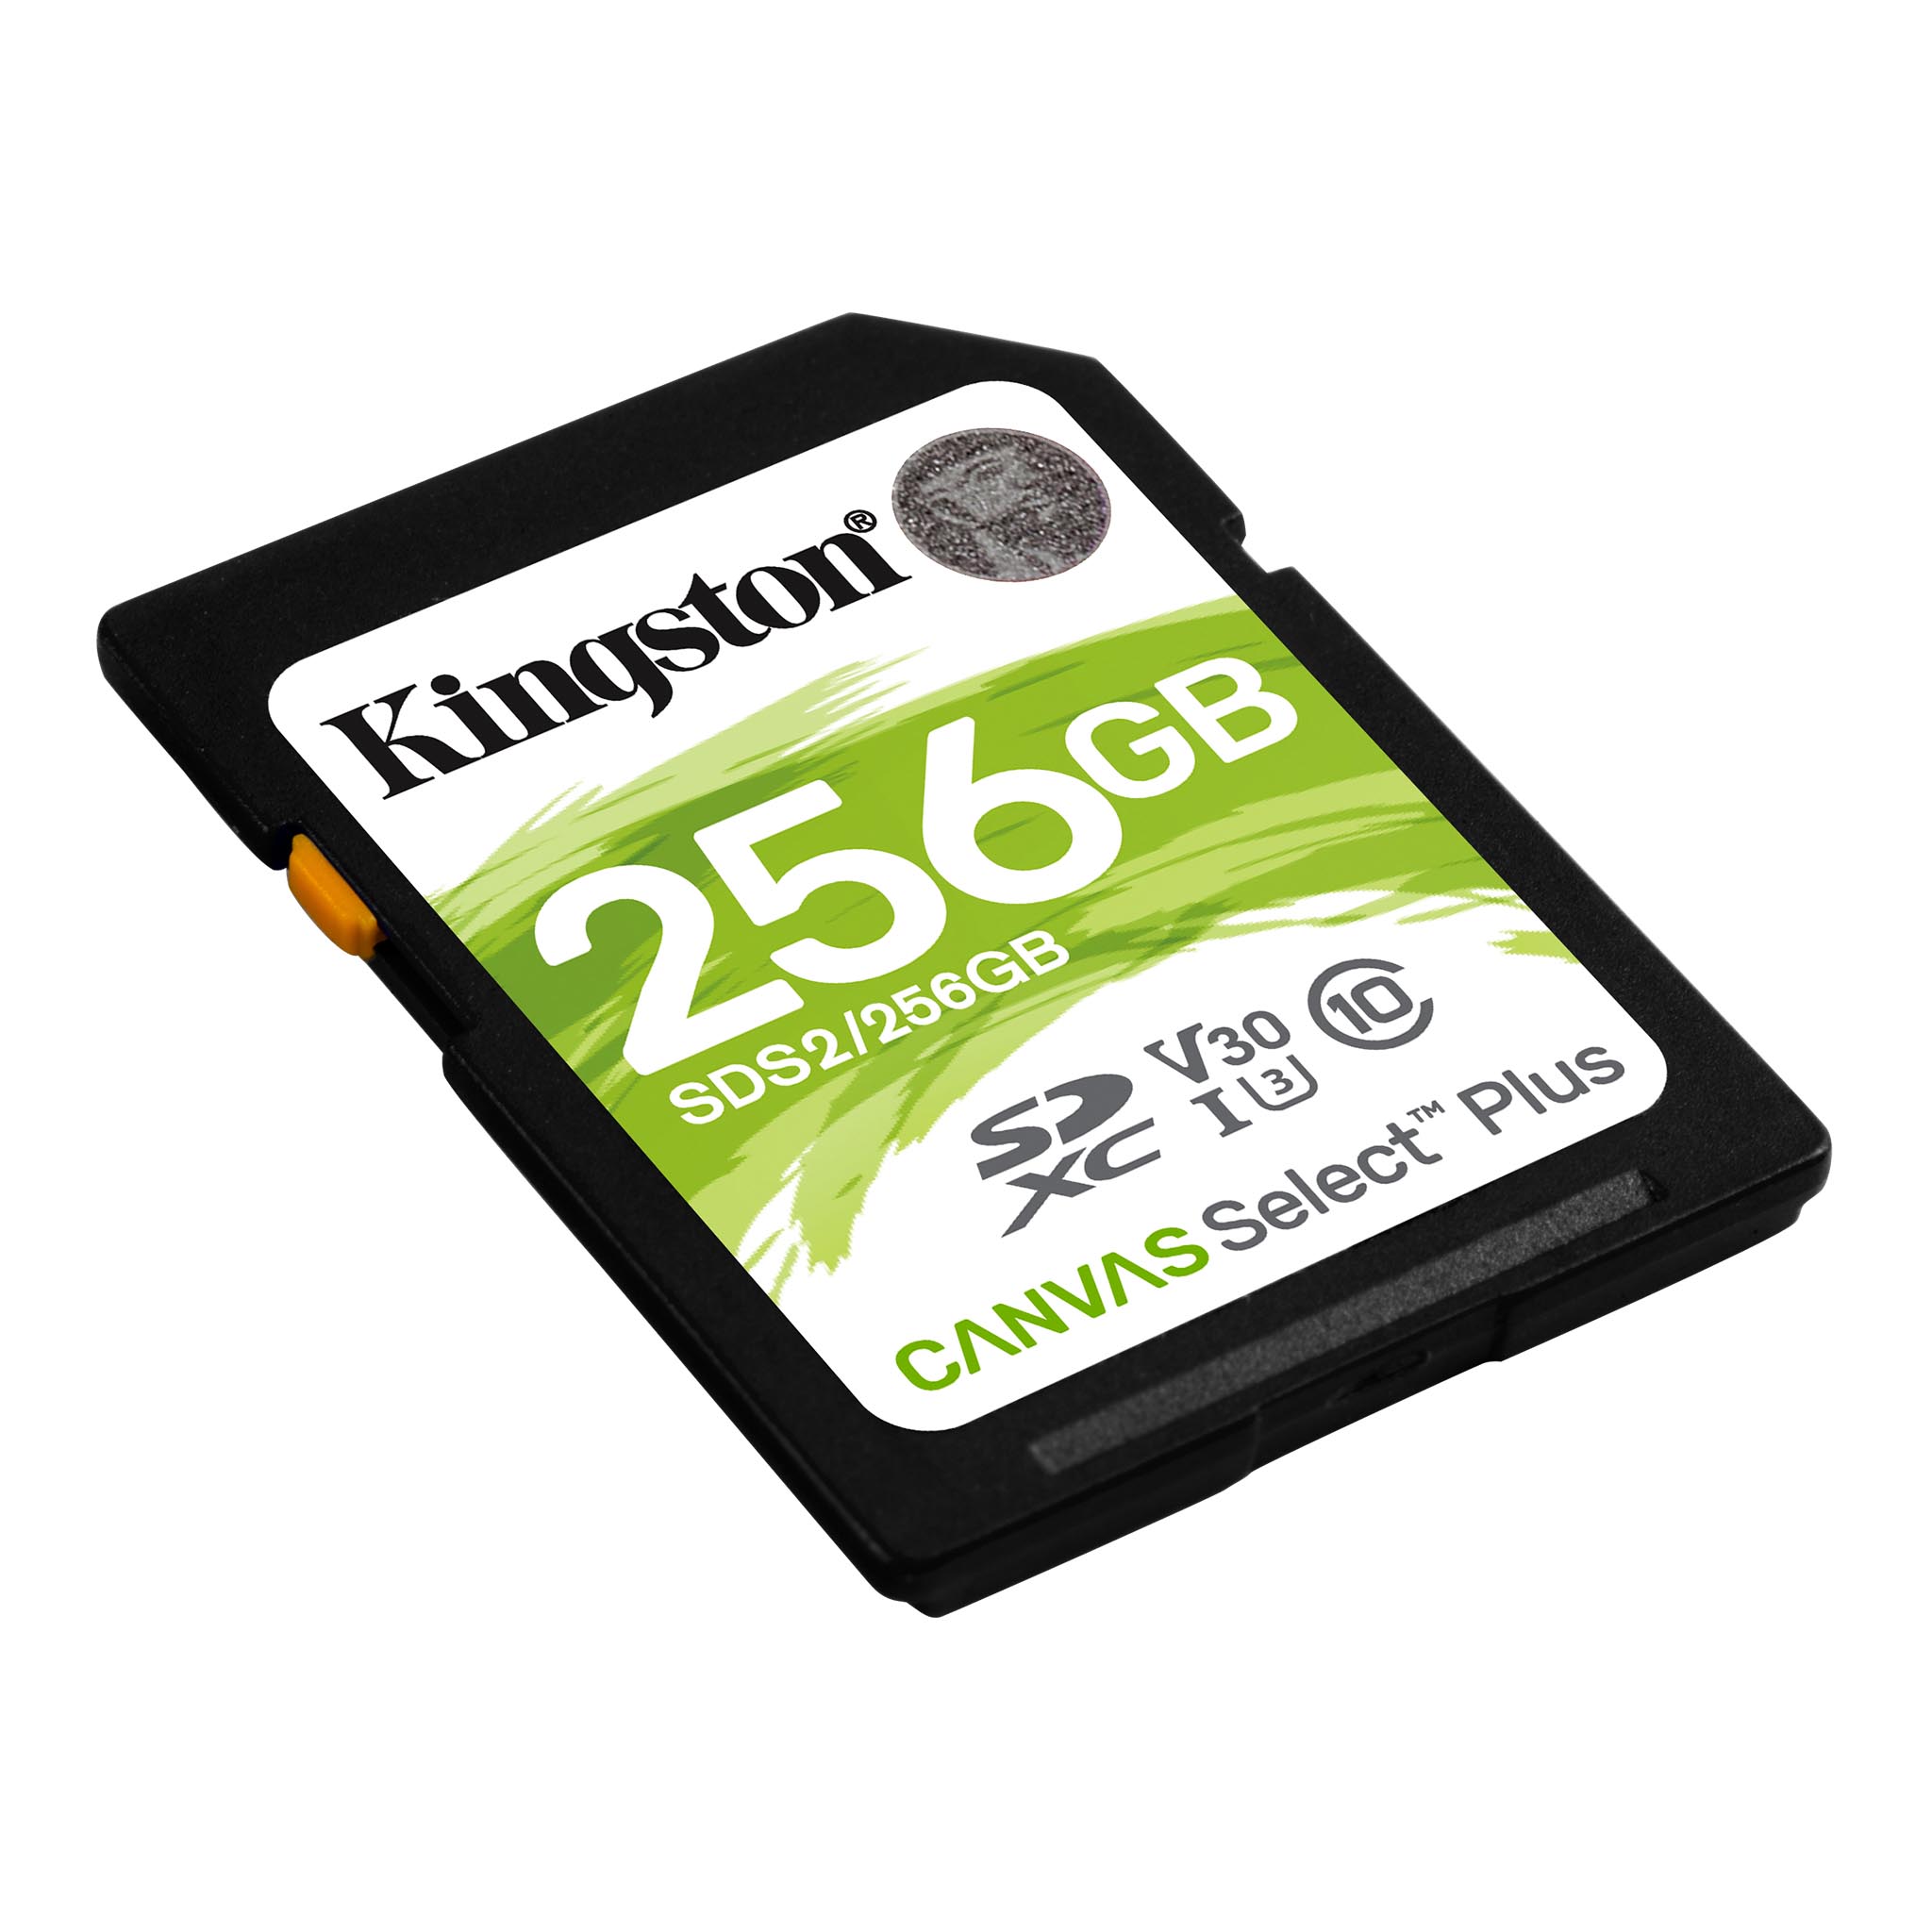 100MBs Works with Kingston Kingston 64GB Canon EOS Rebel SL2 MicroSDXC Canvas Select Plus Card Verified by SanFlash. Black 